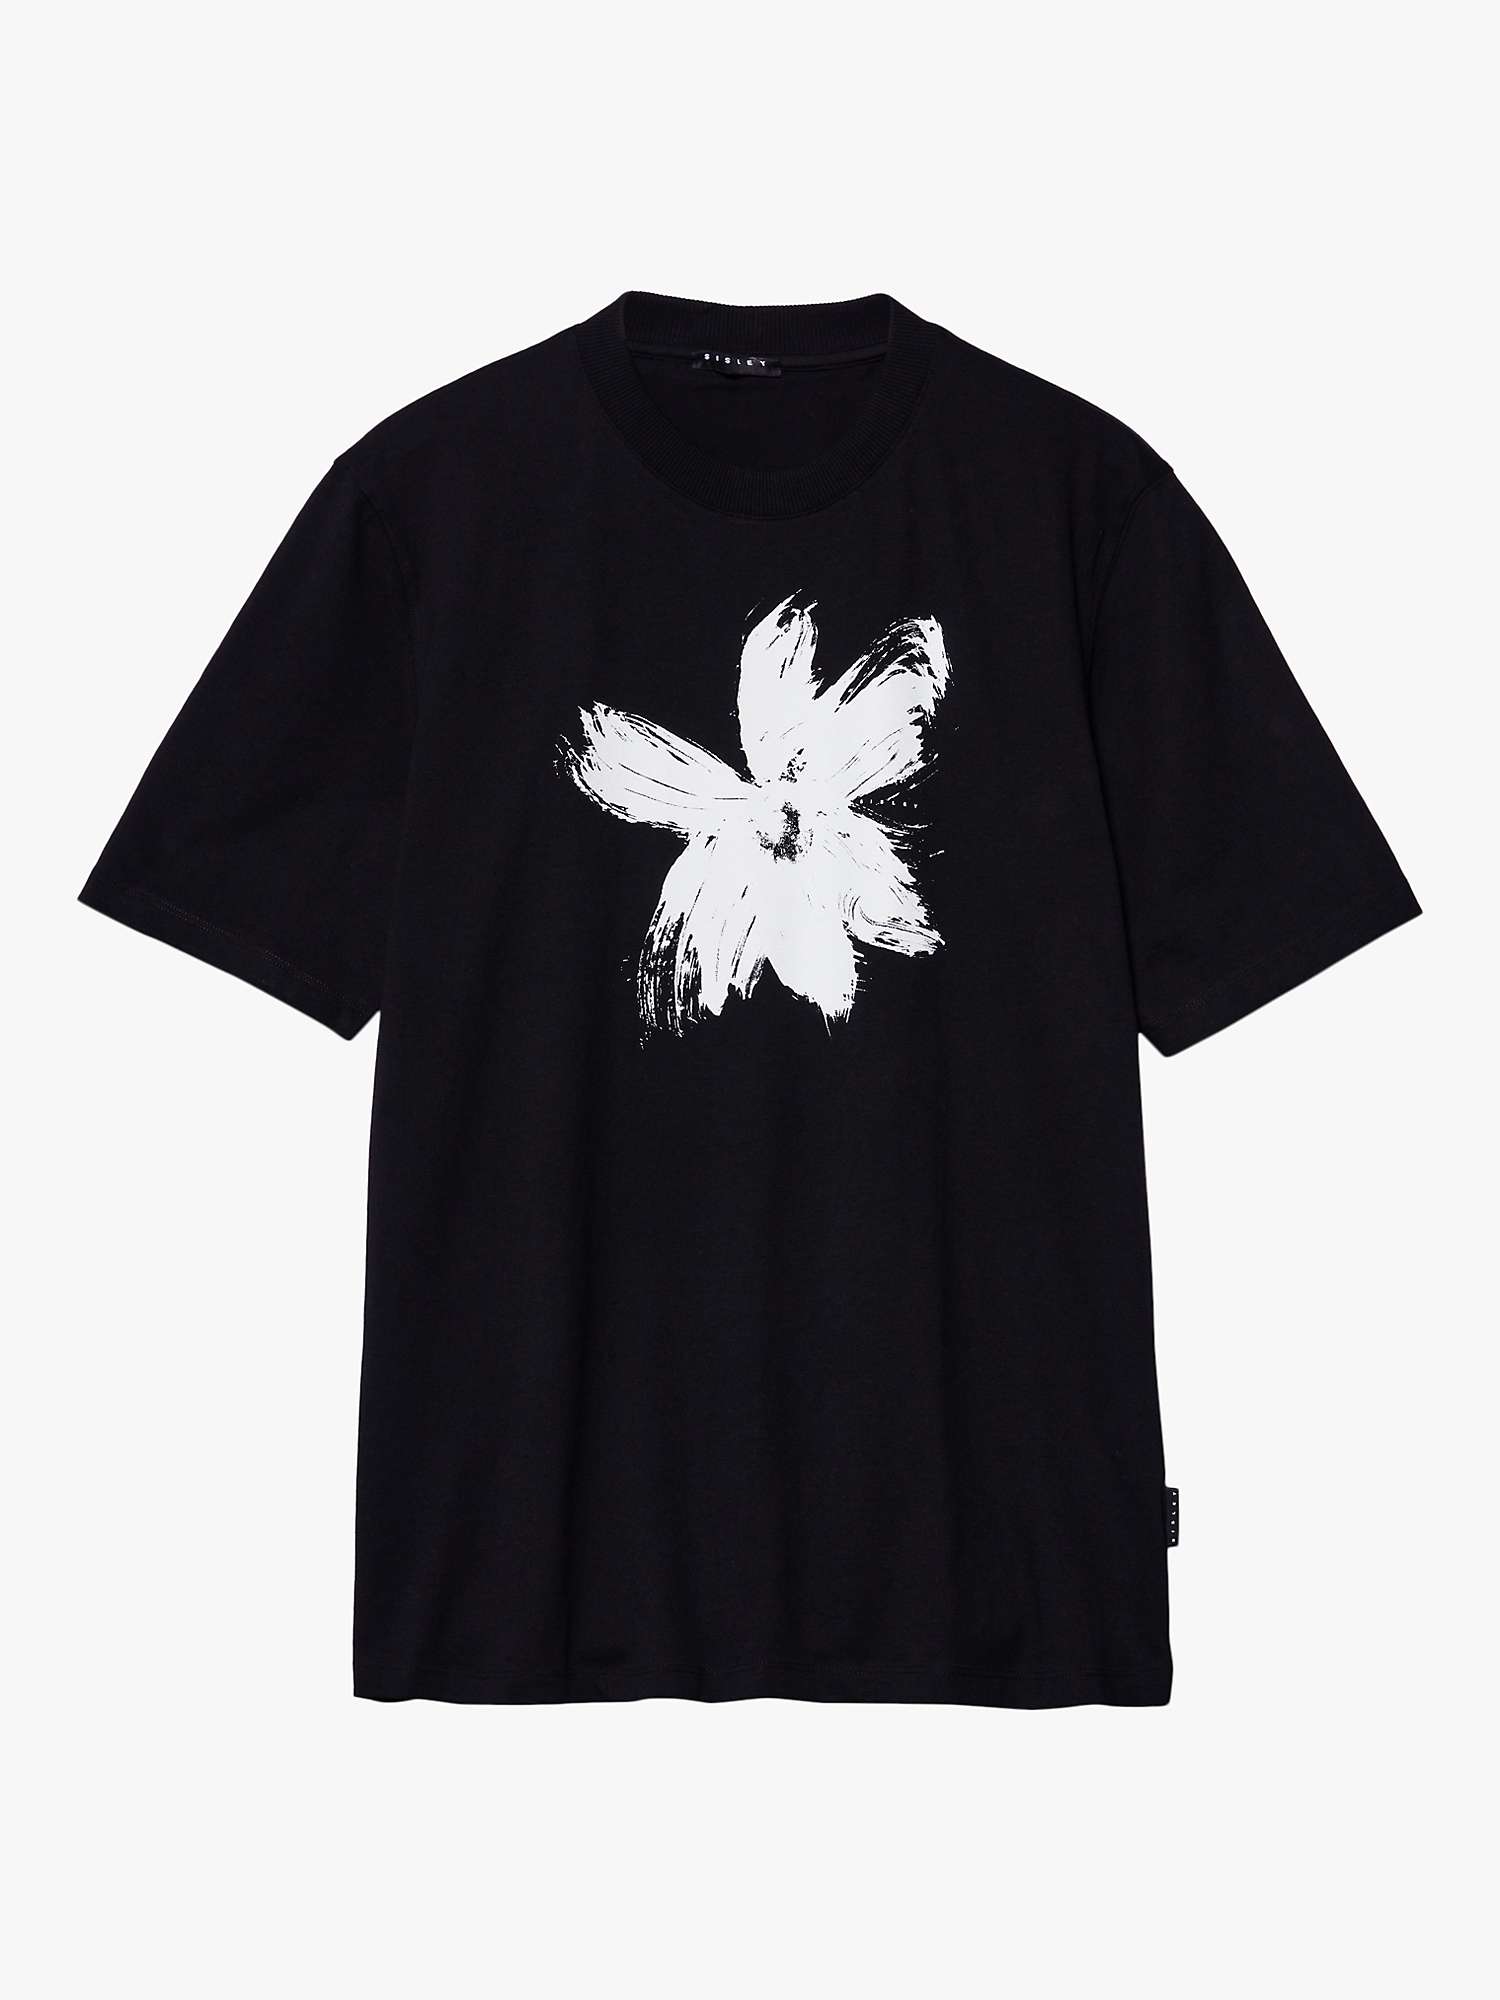 Buy SISLEY Relaxed Fit Printed Short Sleeve T-Shirt, Black Online at johnlewis.com